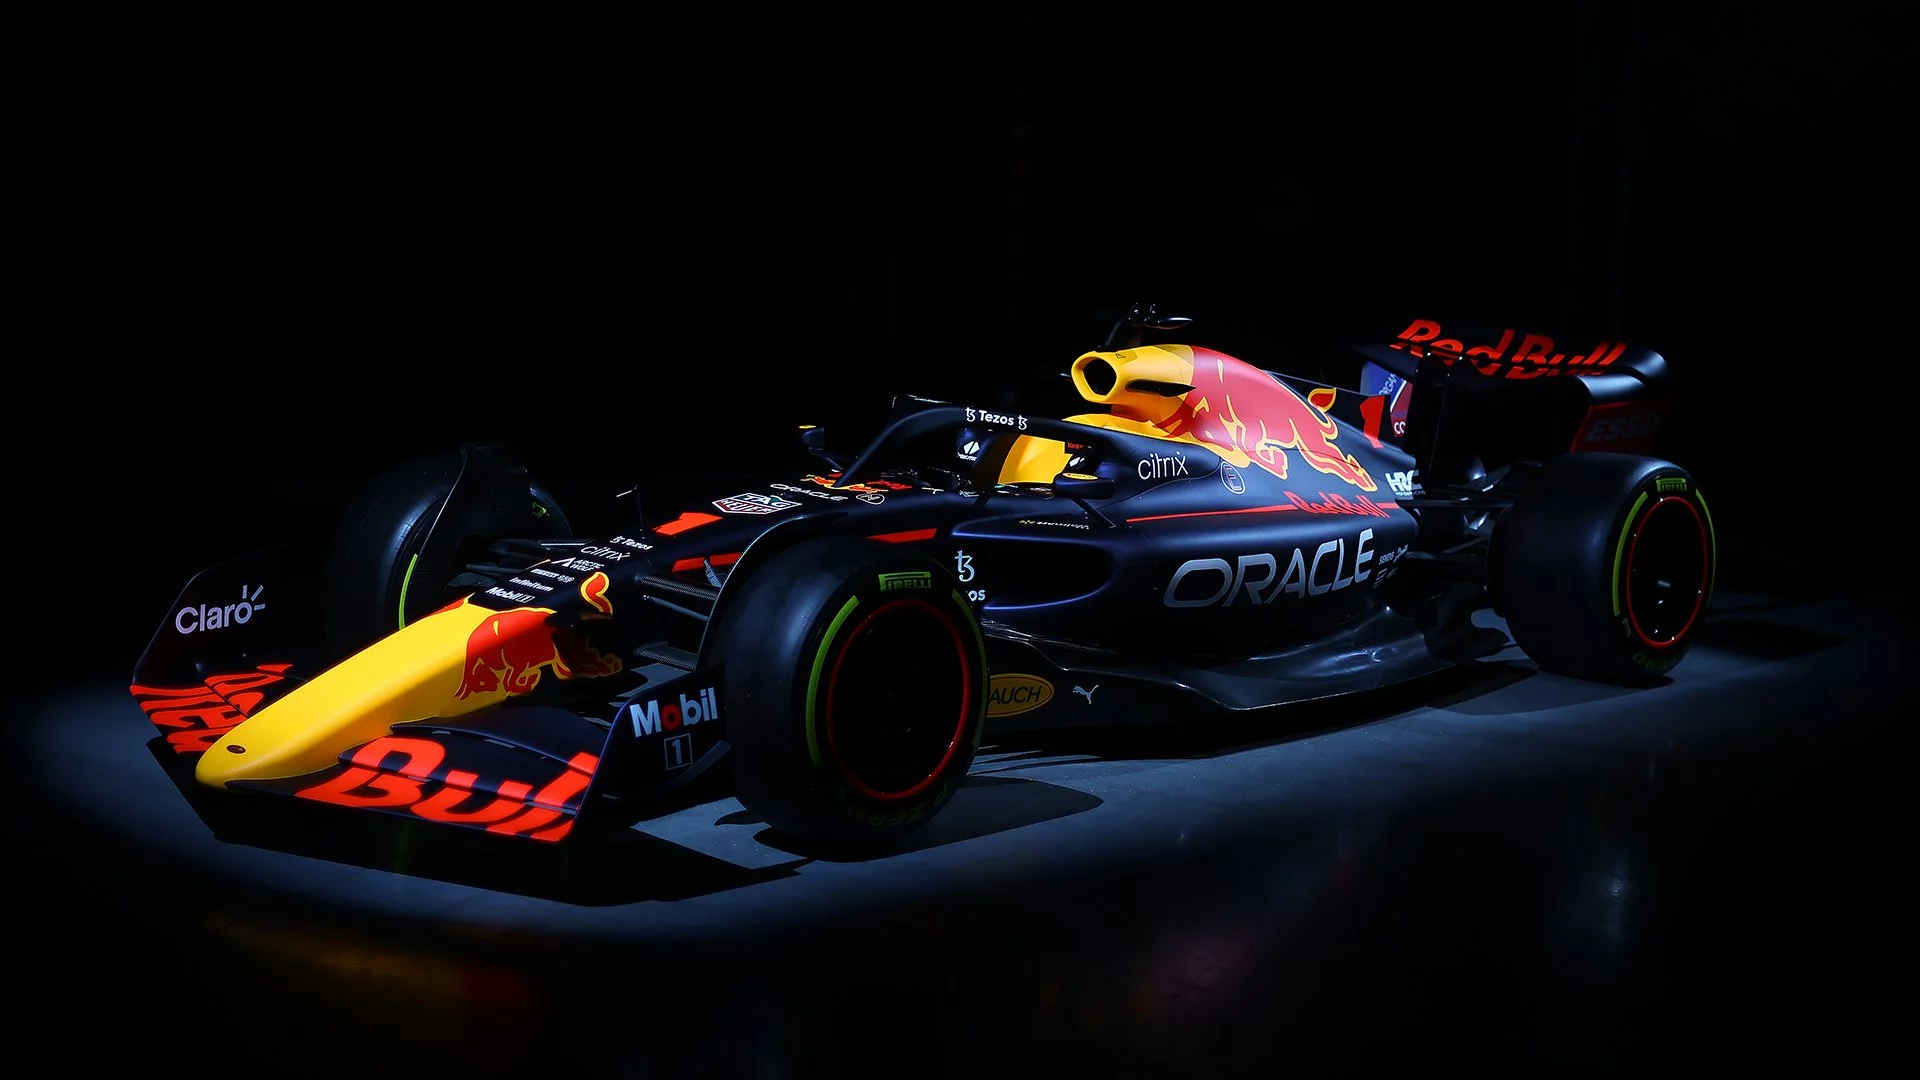 Oracle Red Bull Racing Logo: A Symbol Of Speed And Power